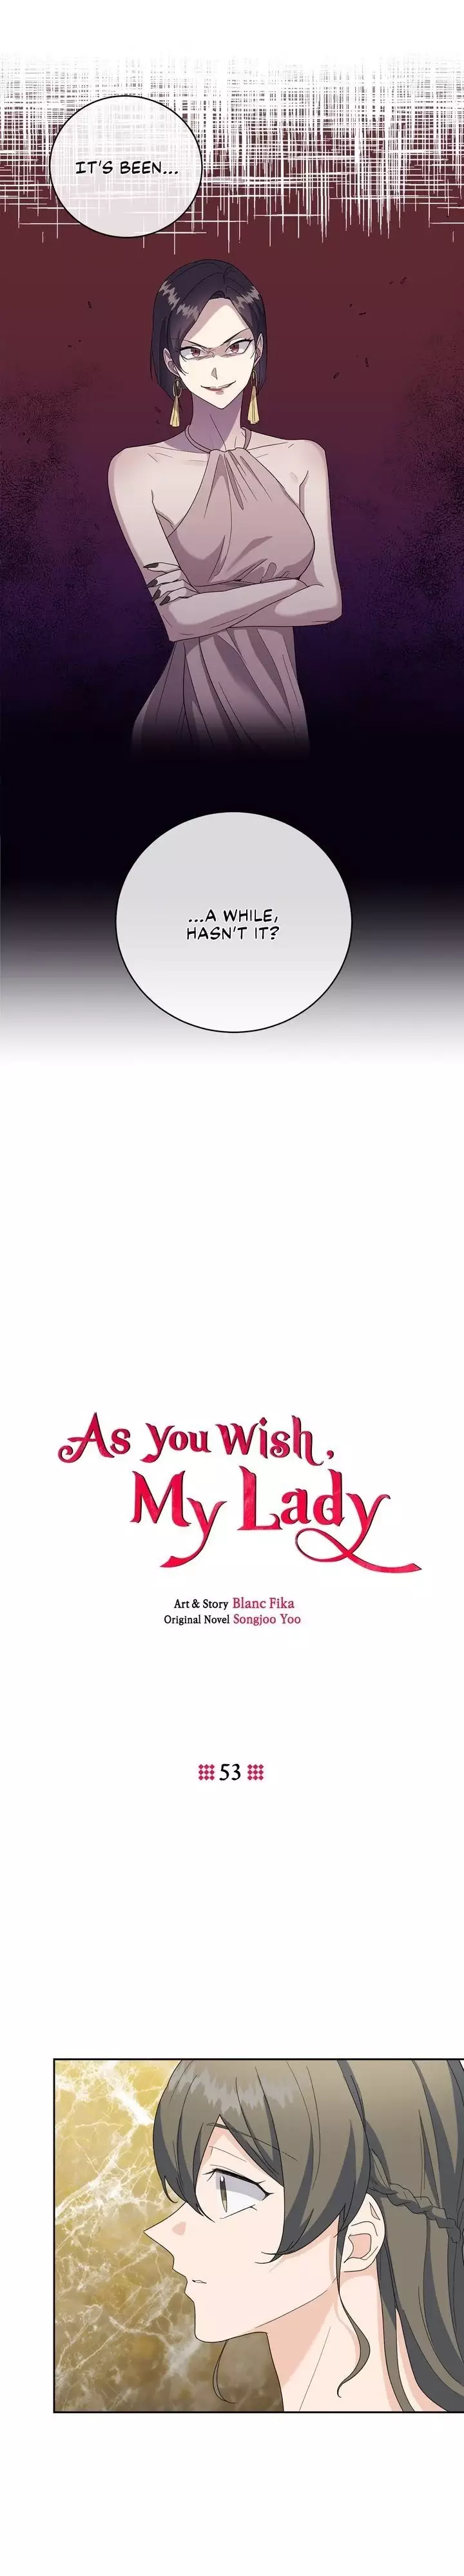 As You Wish My Lady - 53 page 1-d19b54c9